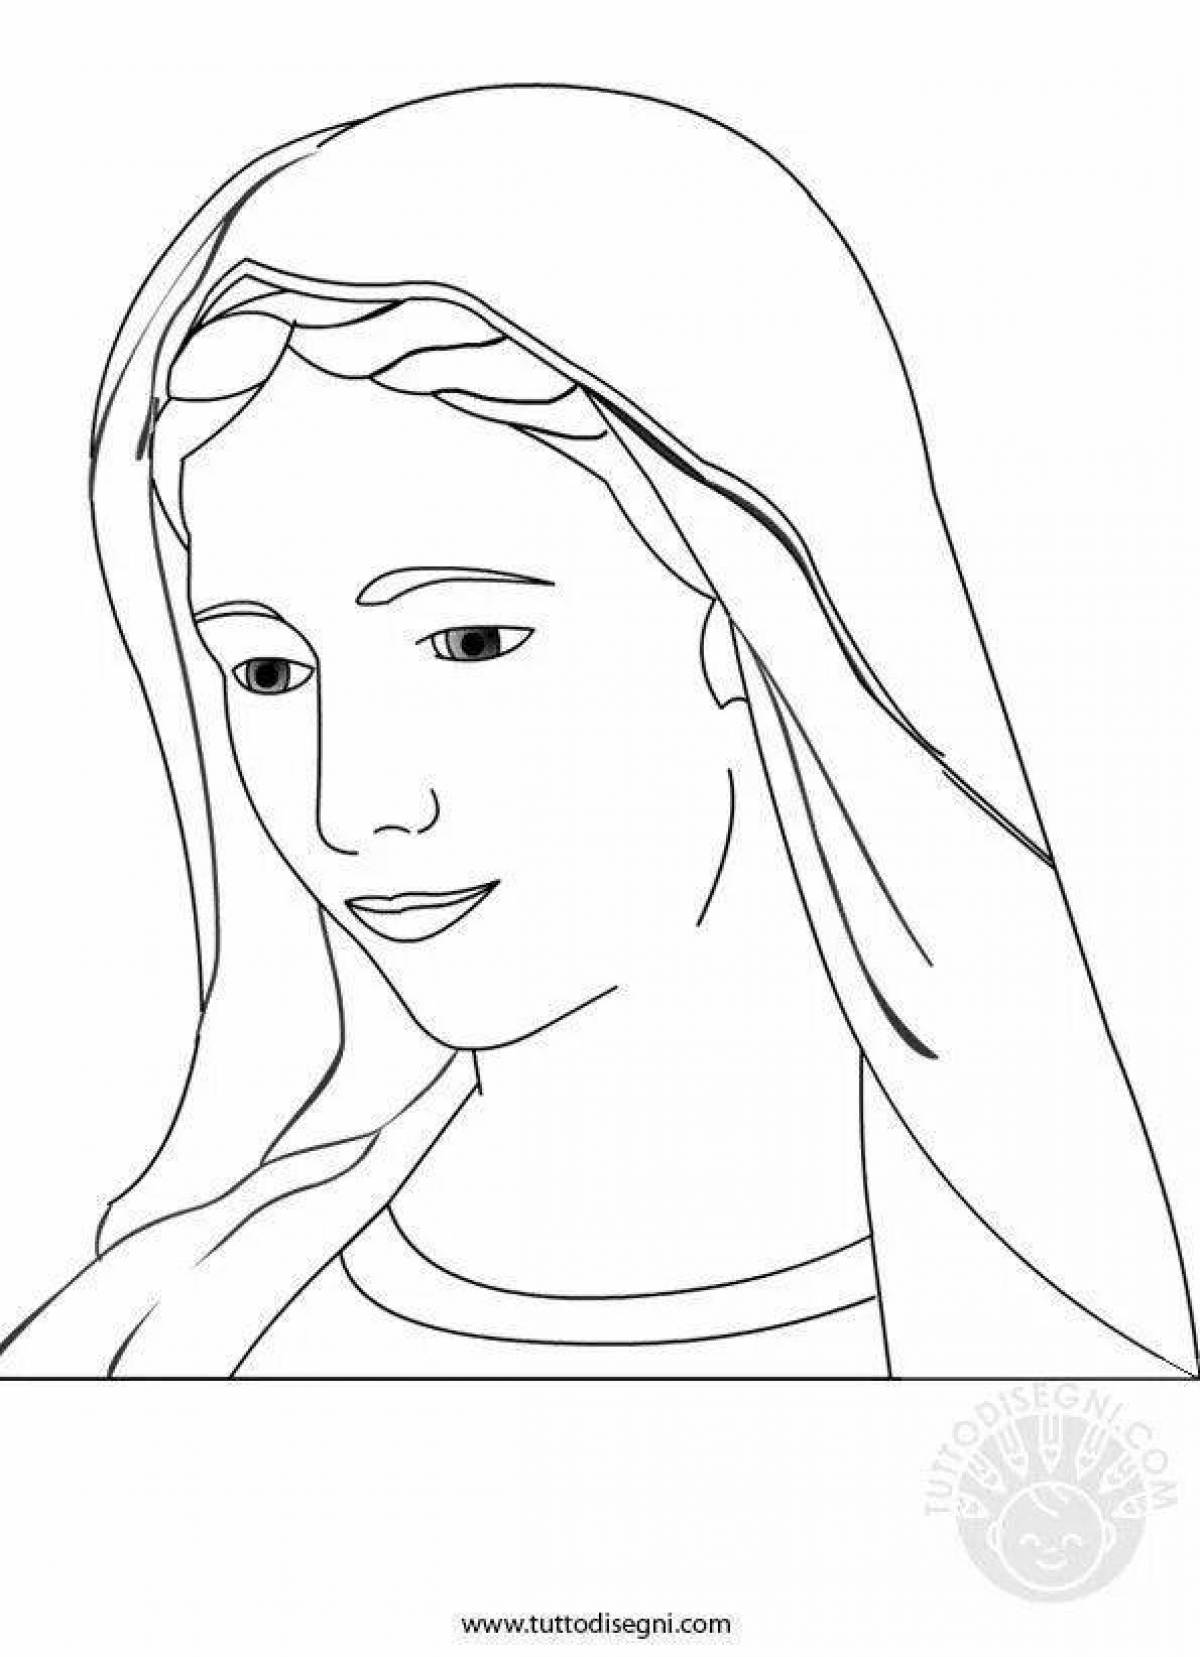 Colouring the Blessed Virgin Mary